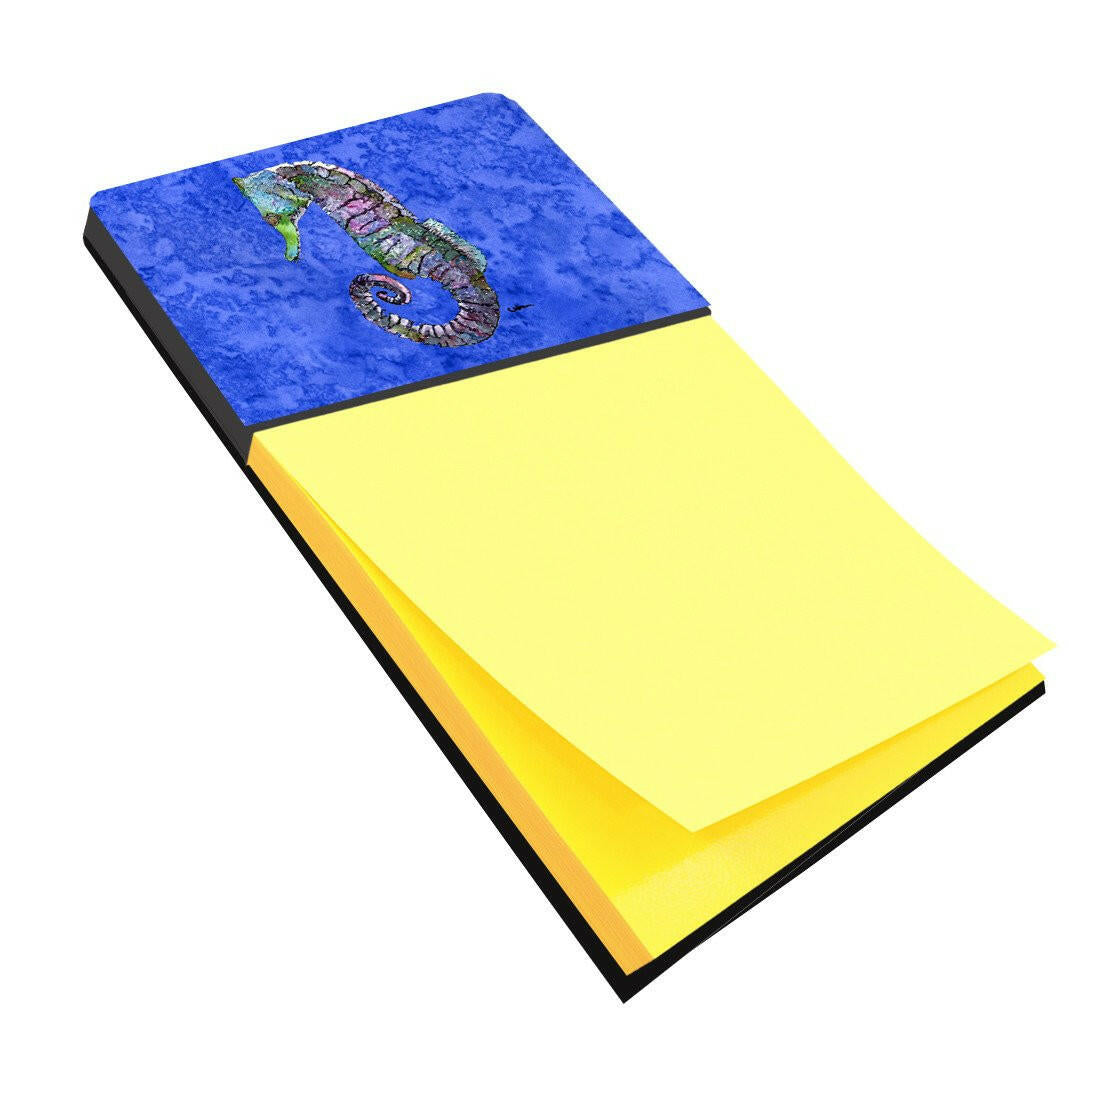 Seahorse Refiillable Sticky Note Holder or Postit Note Dispenser 8639SN by Caroline's Treasures